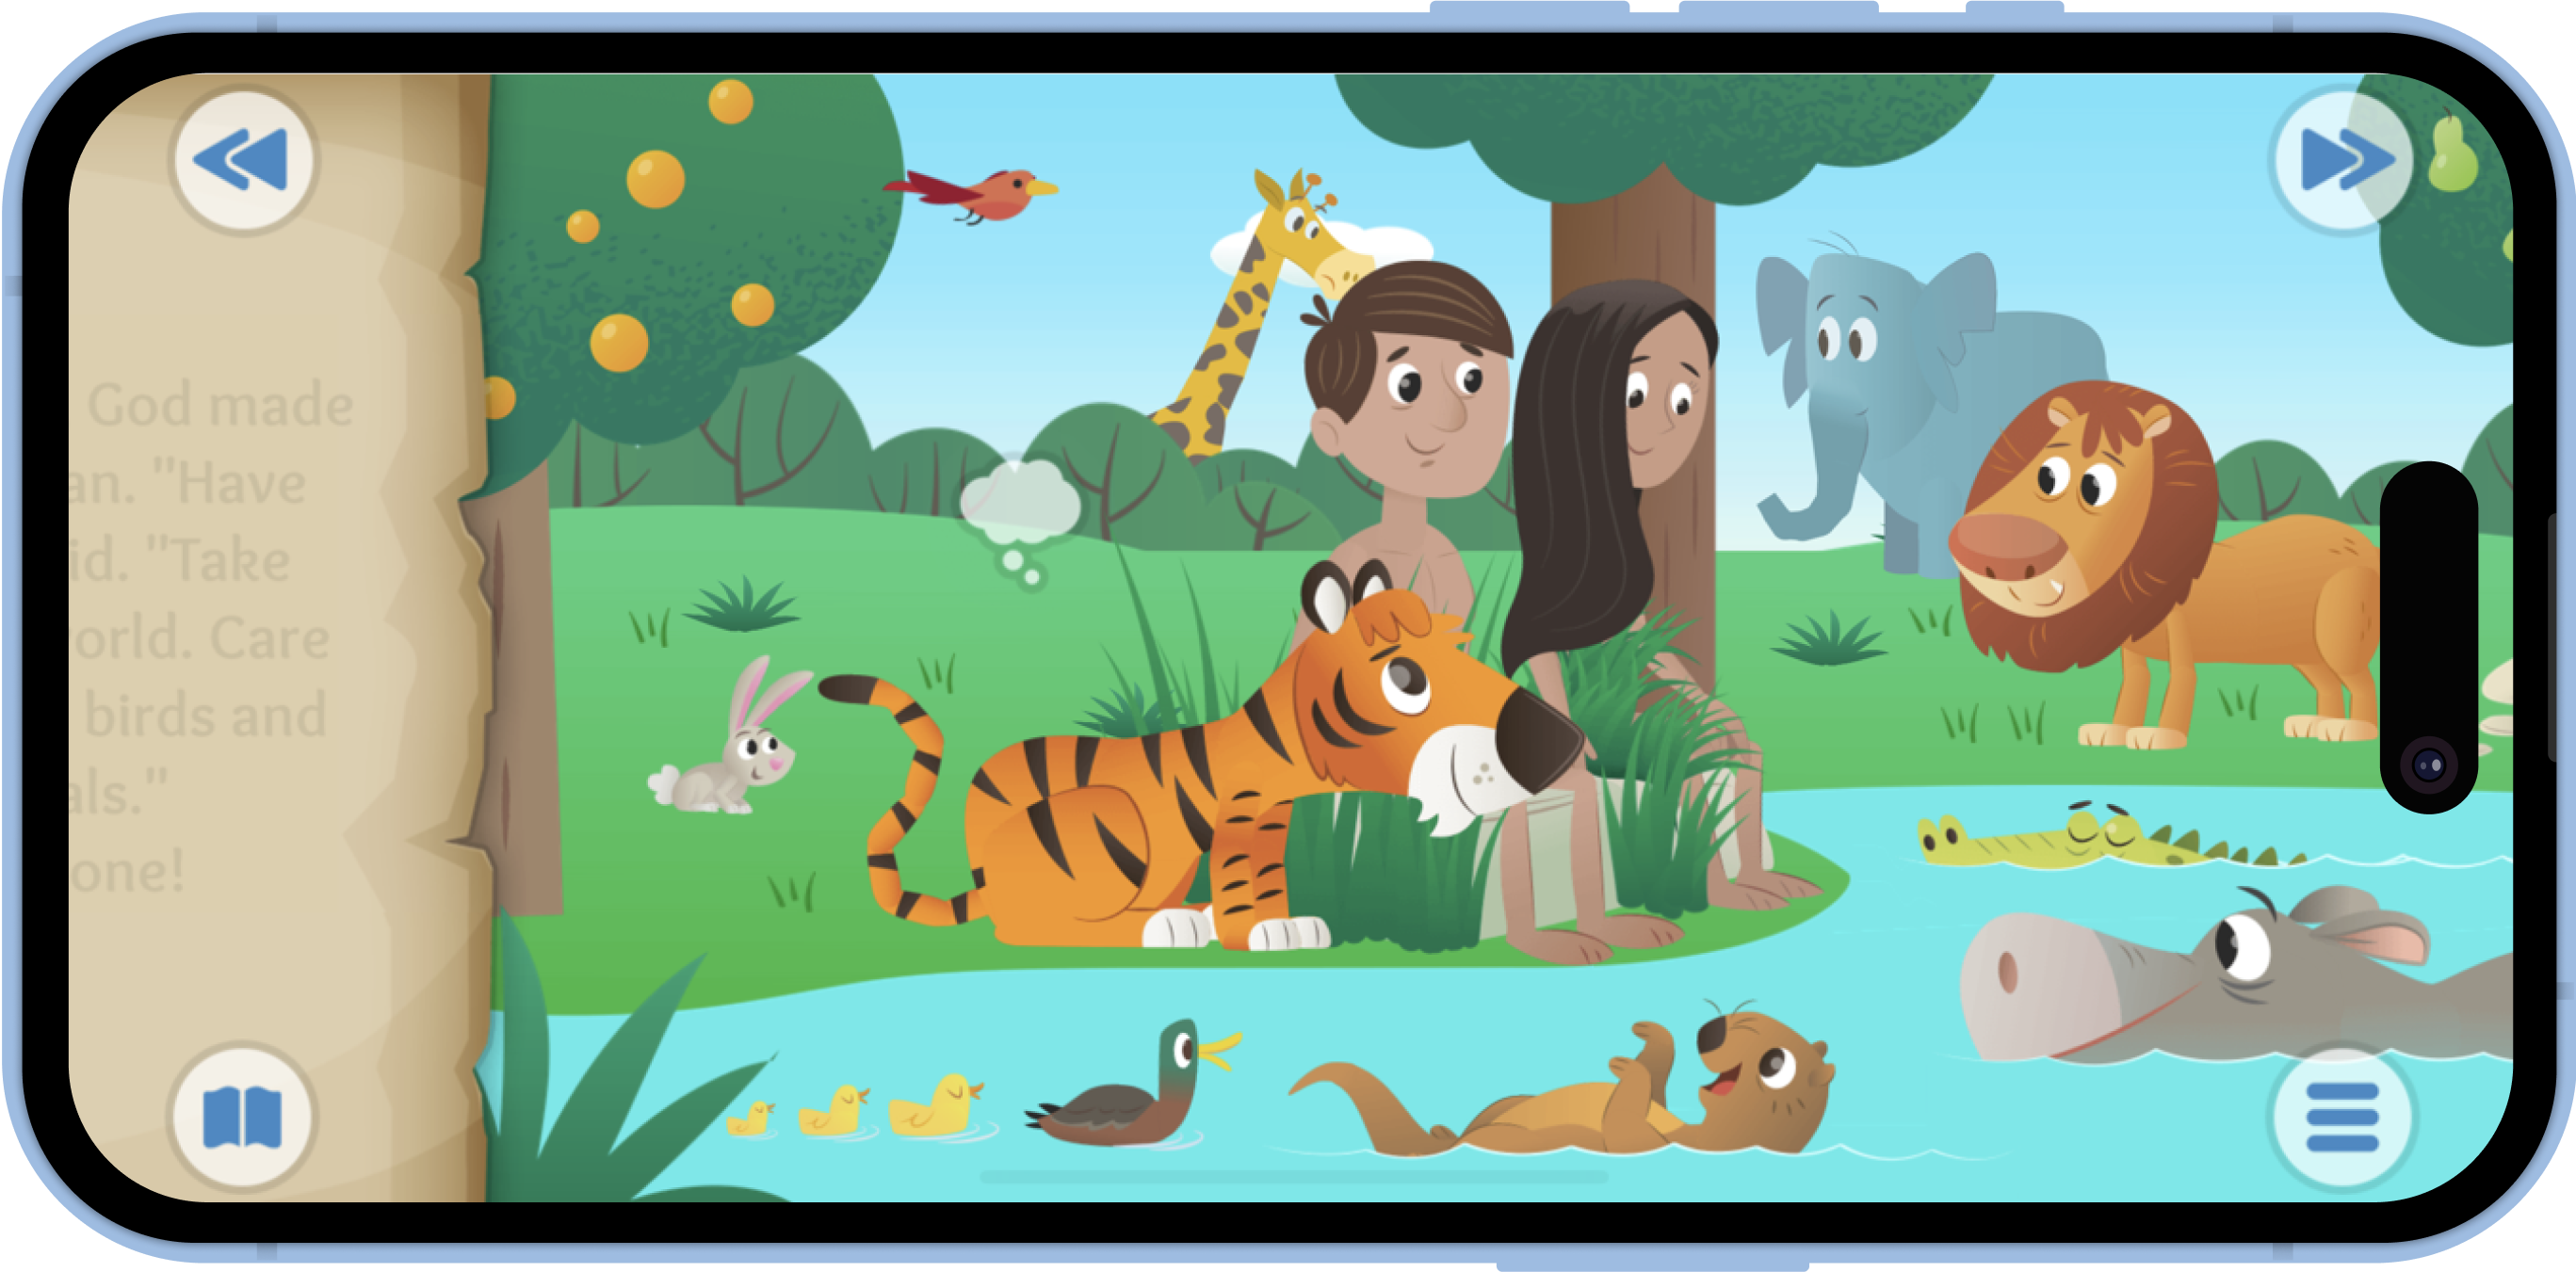 The Bible App for Kids, which is available in 69 languages like Hindi and Bengali, saw a 131% increase in daily use in India 